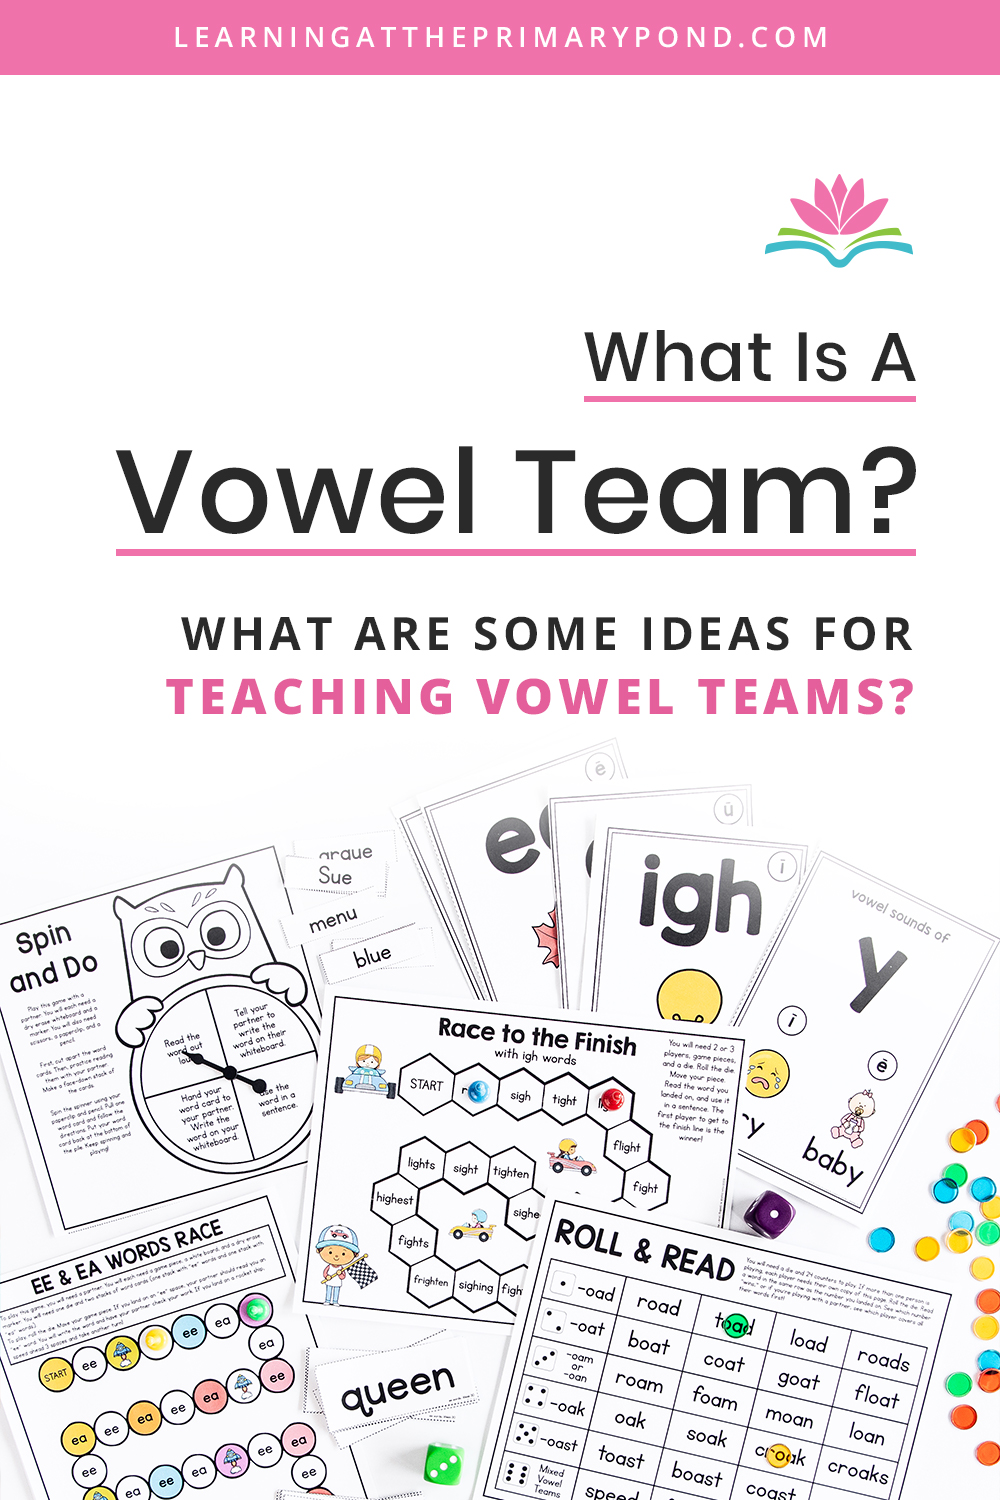 what-is-a-vowel-team-what-are-some-ideas-for-teaching-vowel-teams-learning-at-the-primary-pond